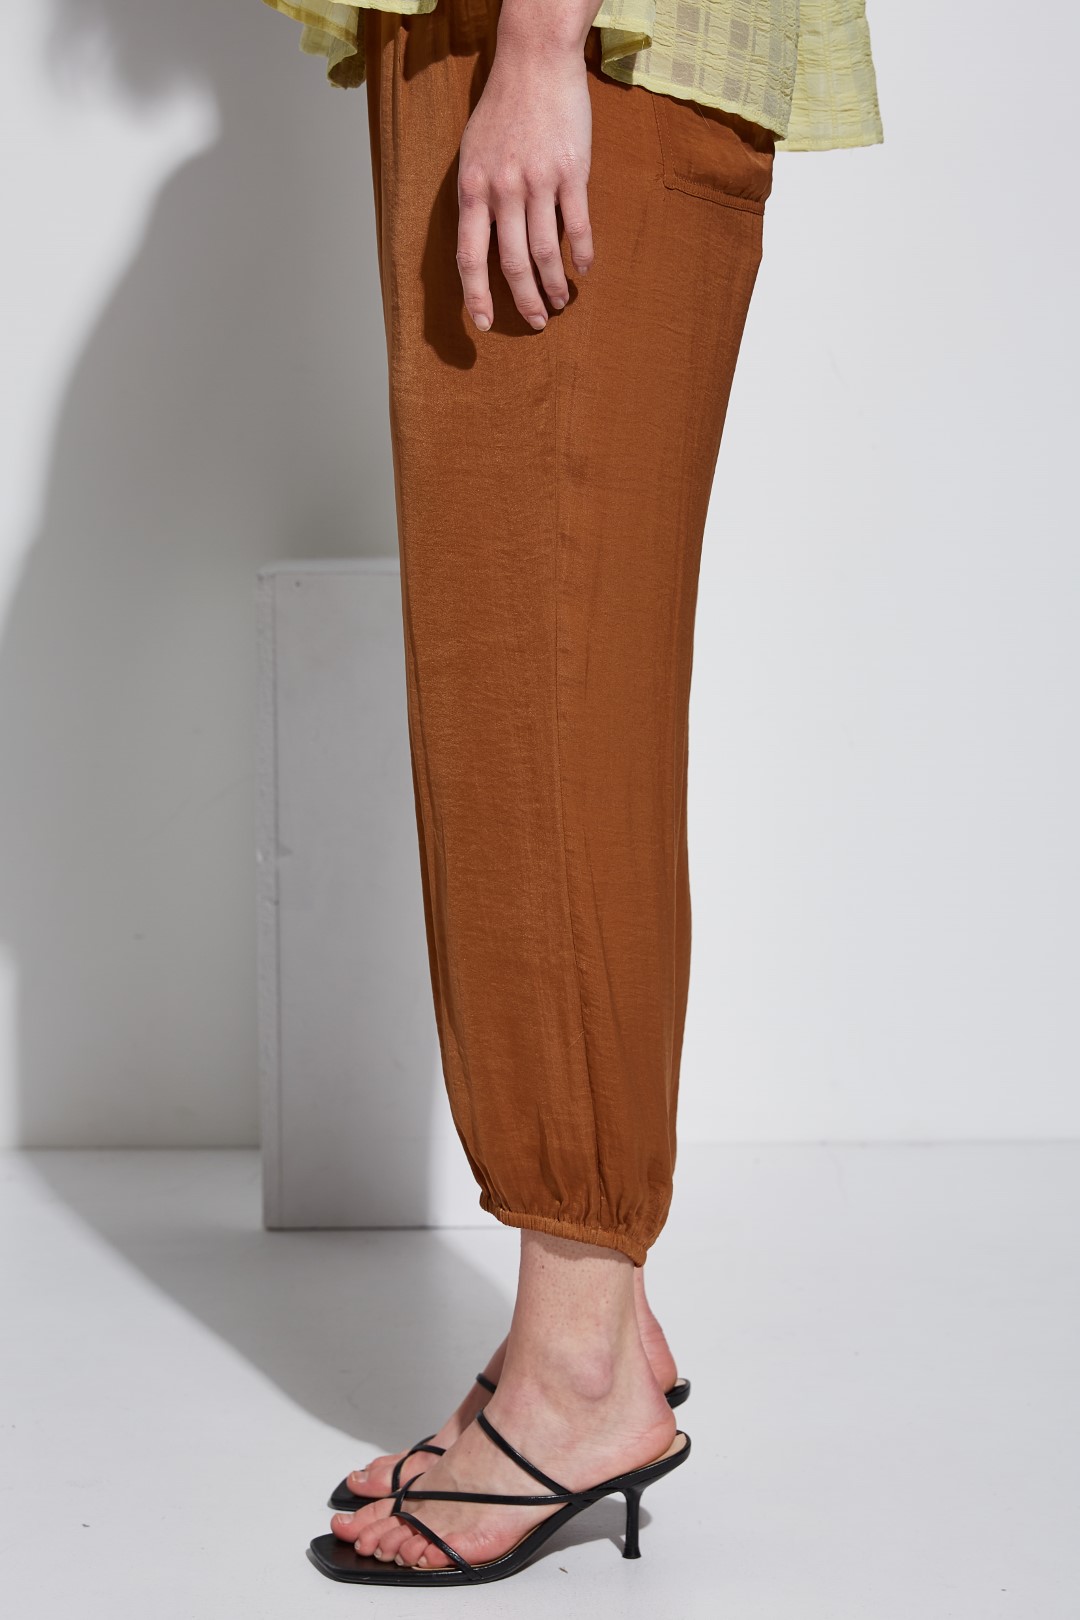 Trousers with elasticband on the waist